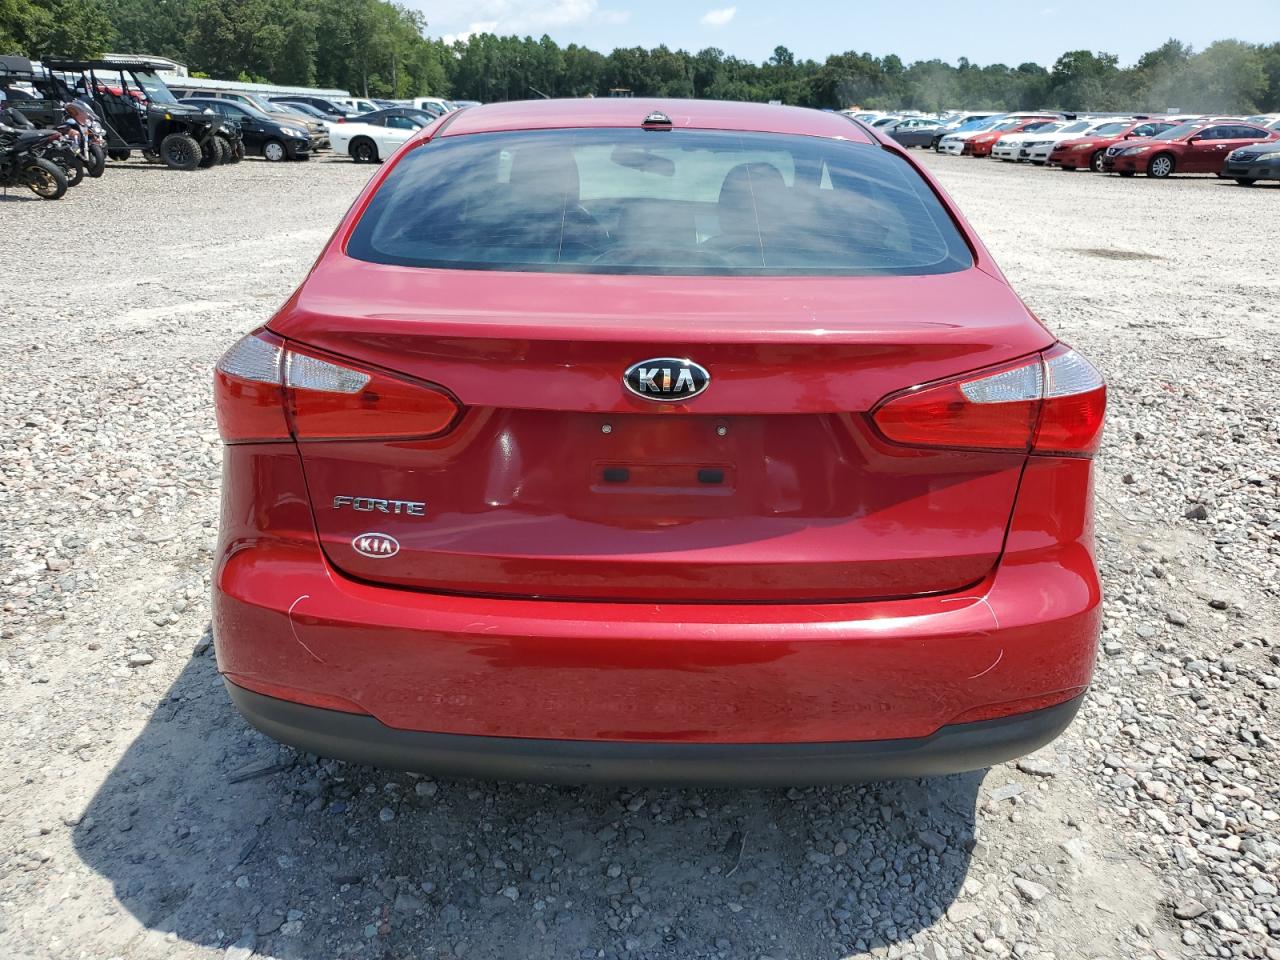 Buy 2016 Kia Forte Lx 1.8L KNAFK4A63G5****** from USA Auctions 